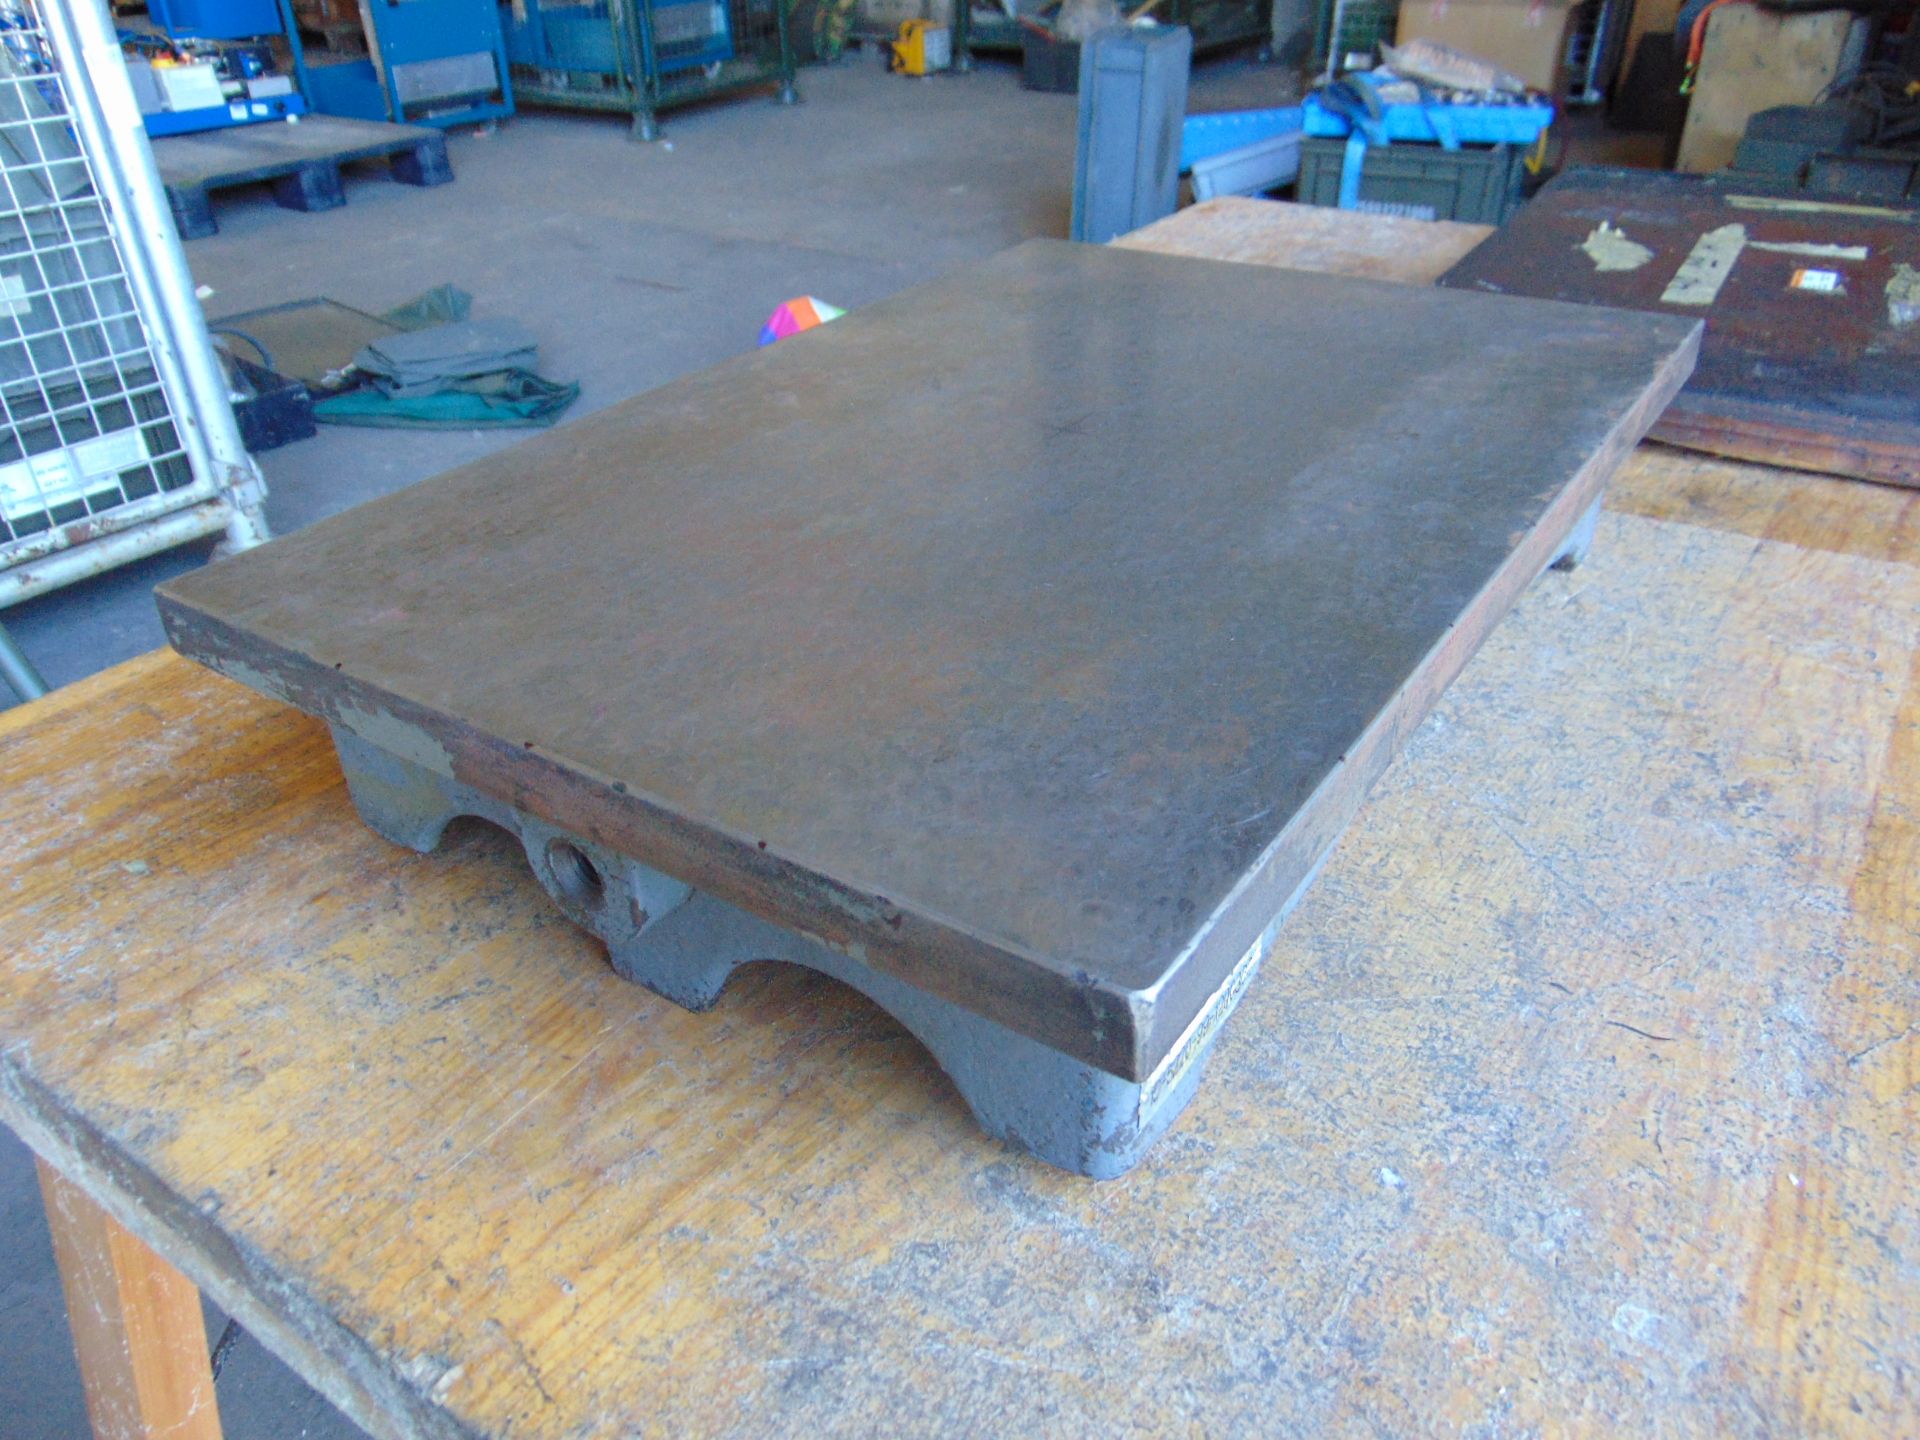 Crown Windley Bros Cast Iron Engineering Surface Plate 18" x 12" - Image 4 of 11